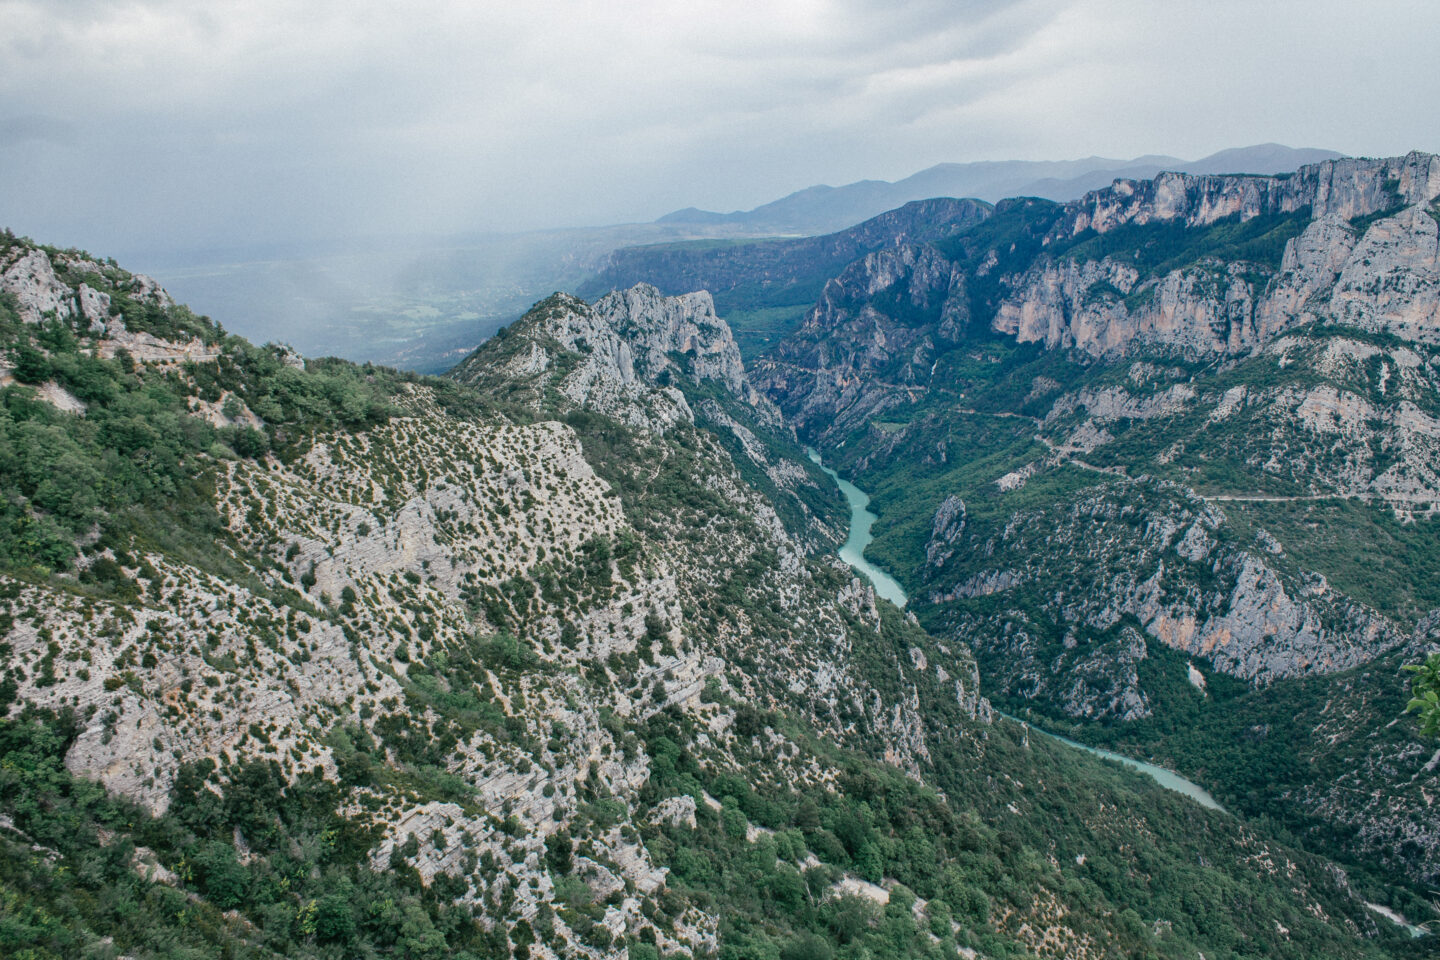 Looking down at the Gorges de Verdon and the bright turquoise river that runs through it in France